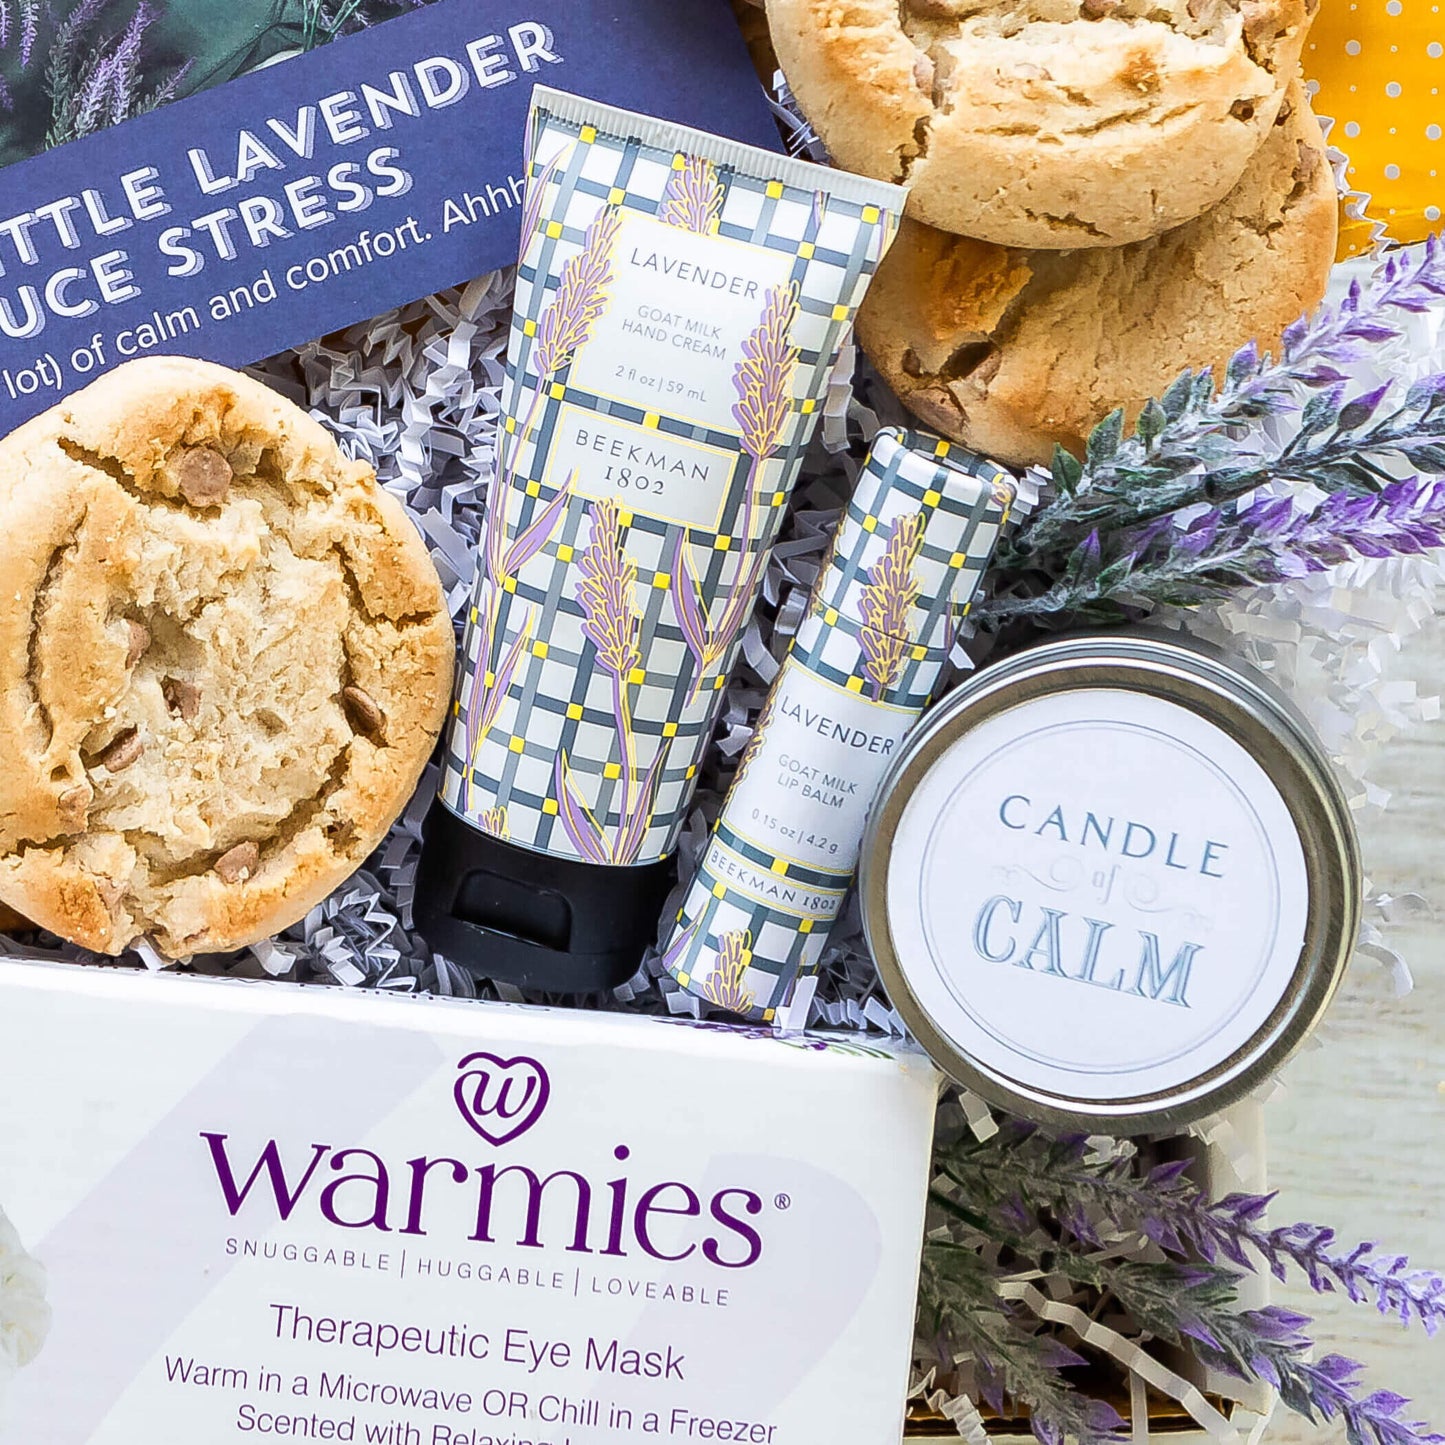 Meme-Theme Lavender Package product image